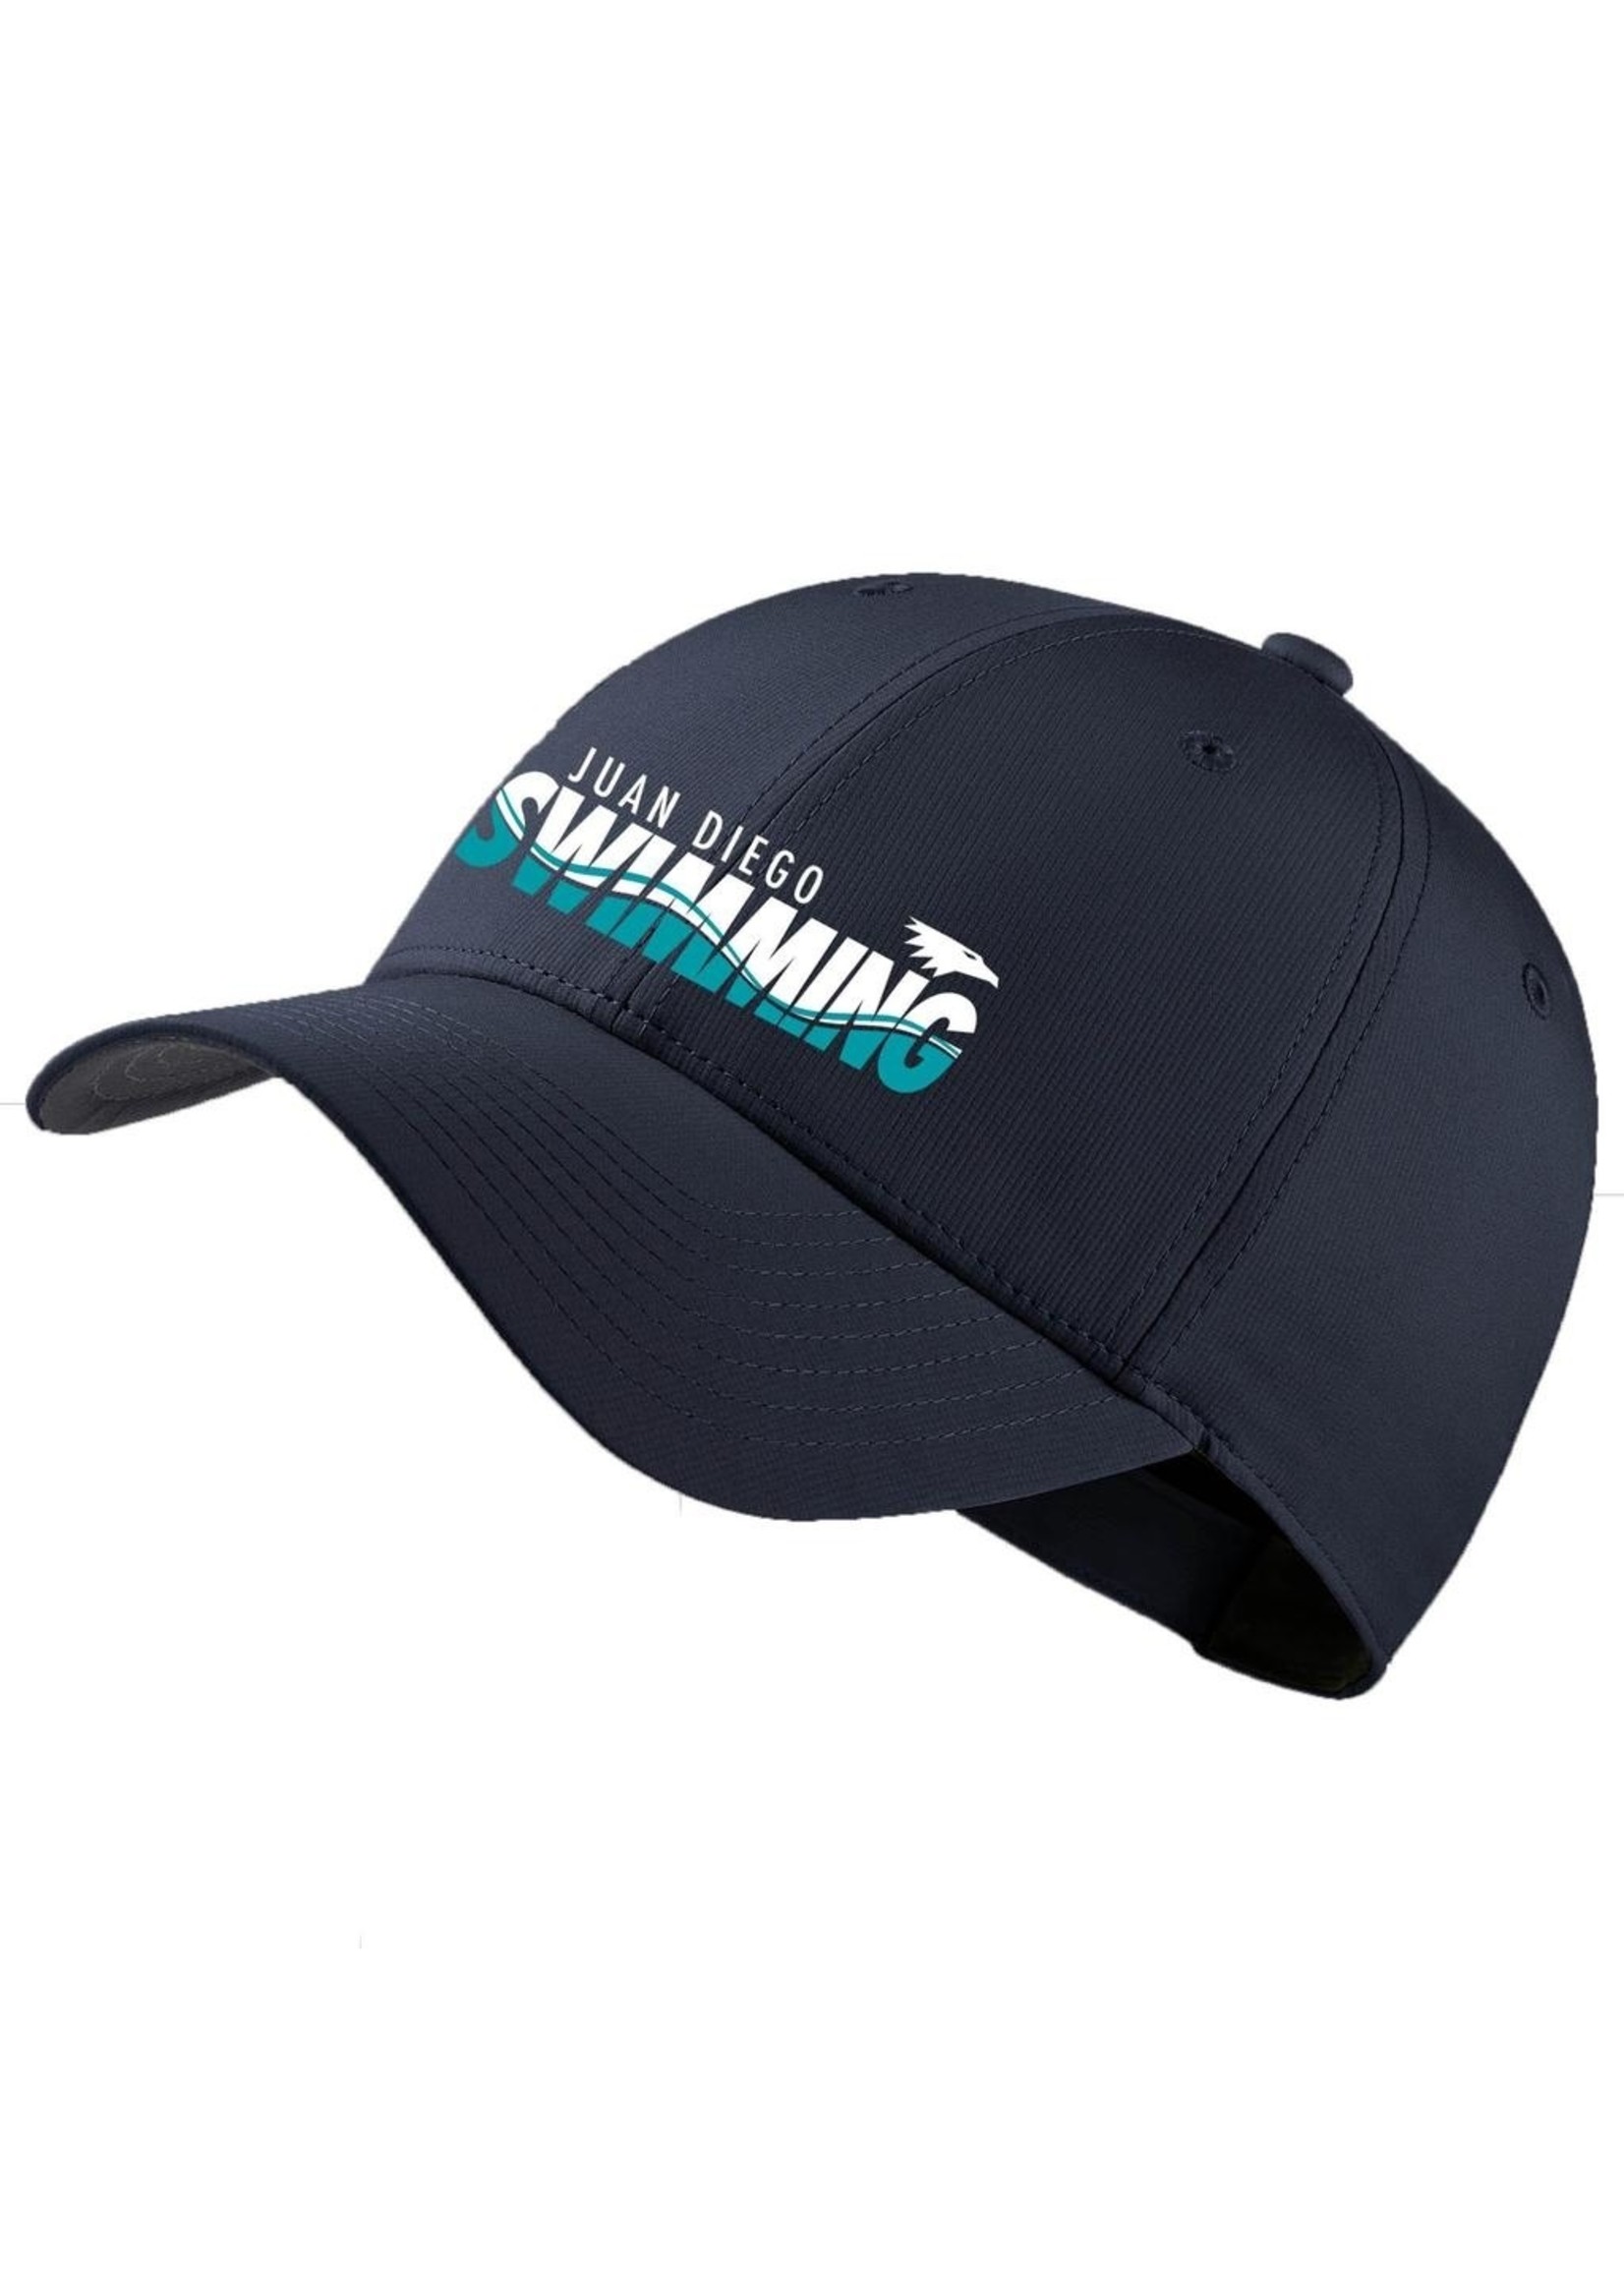 NON-UNIFORM Nike hat in navy with embroidered swim logo   2652451